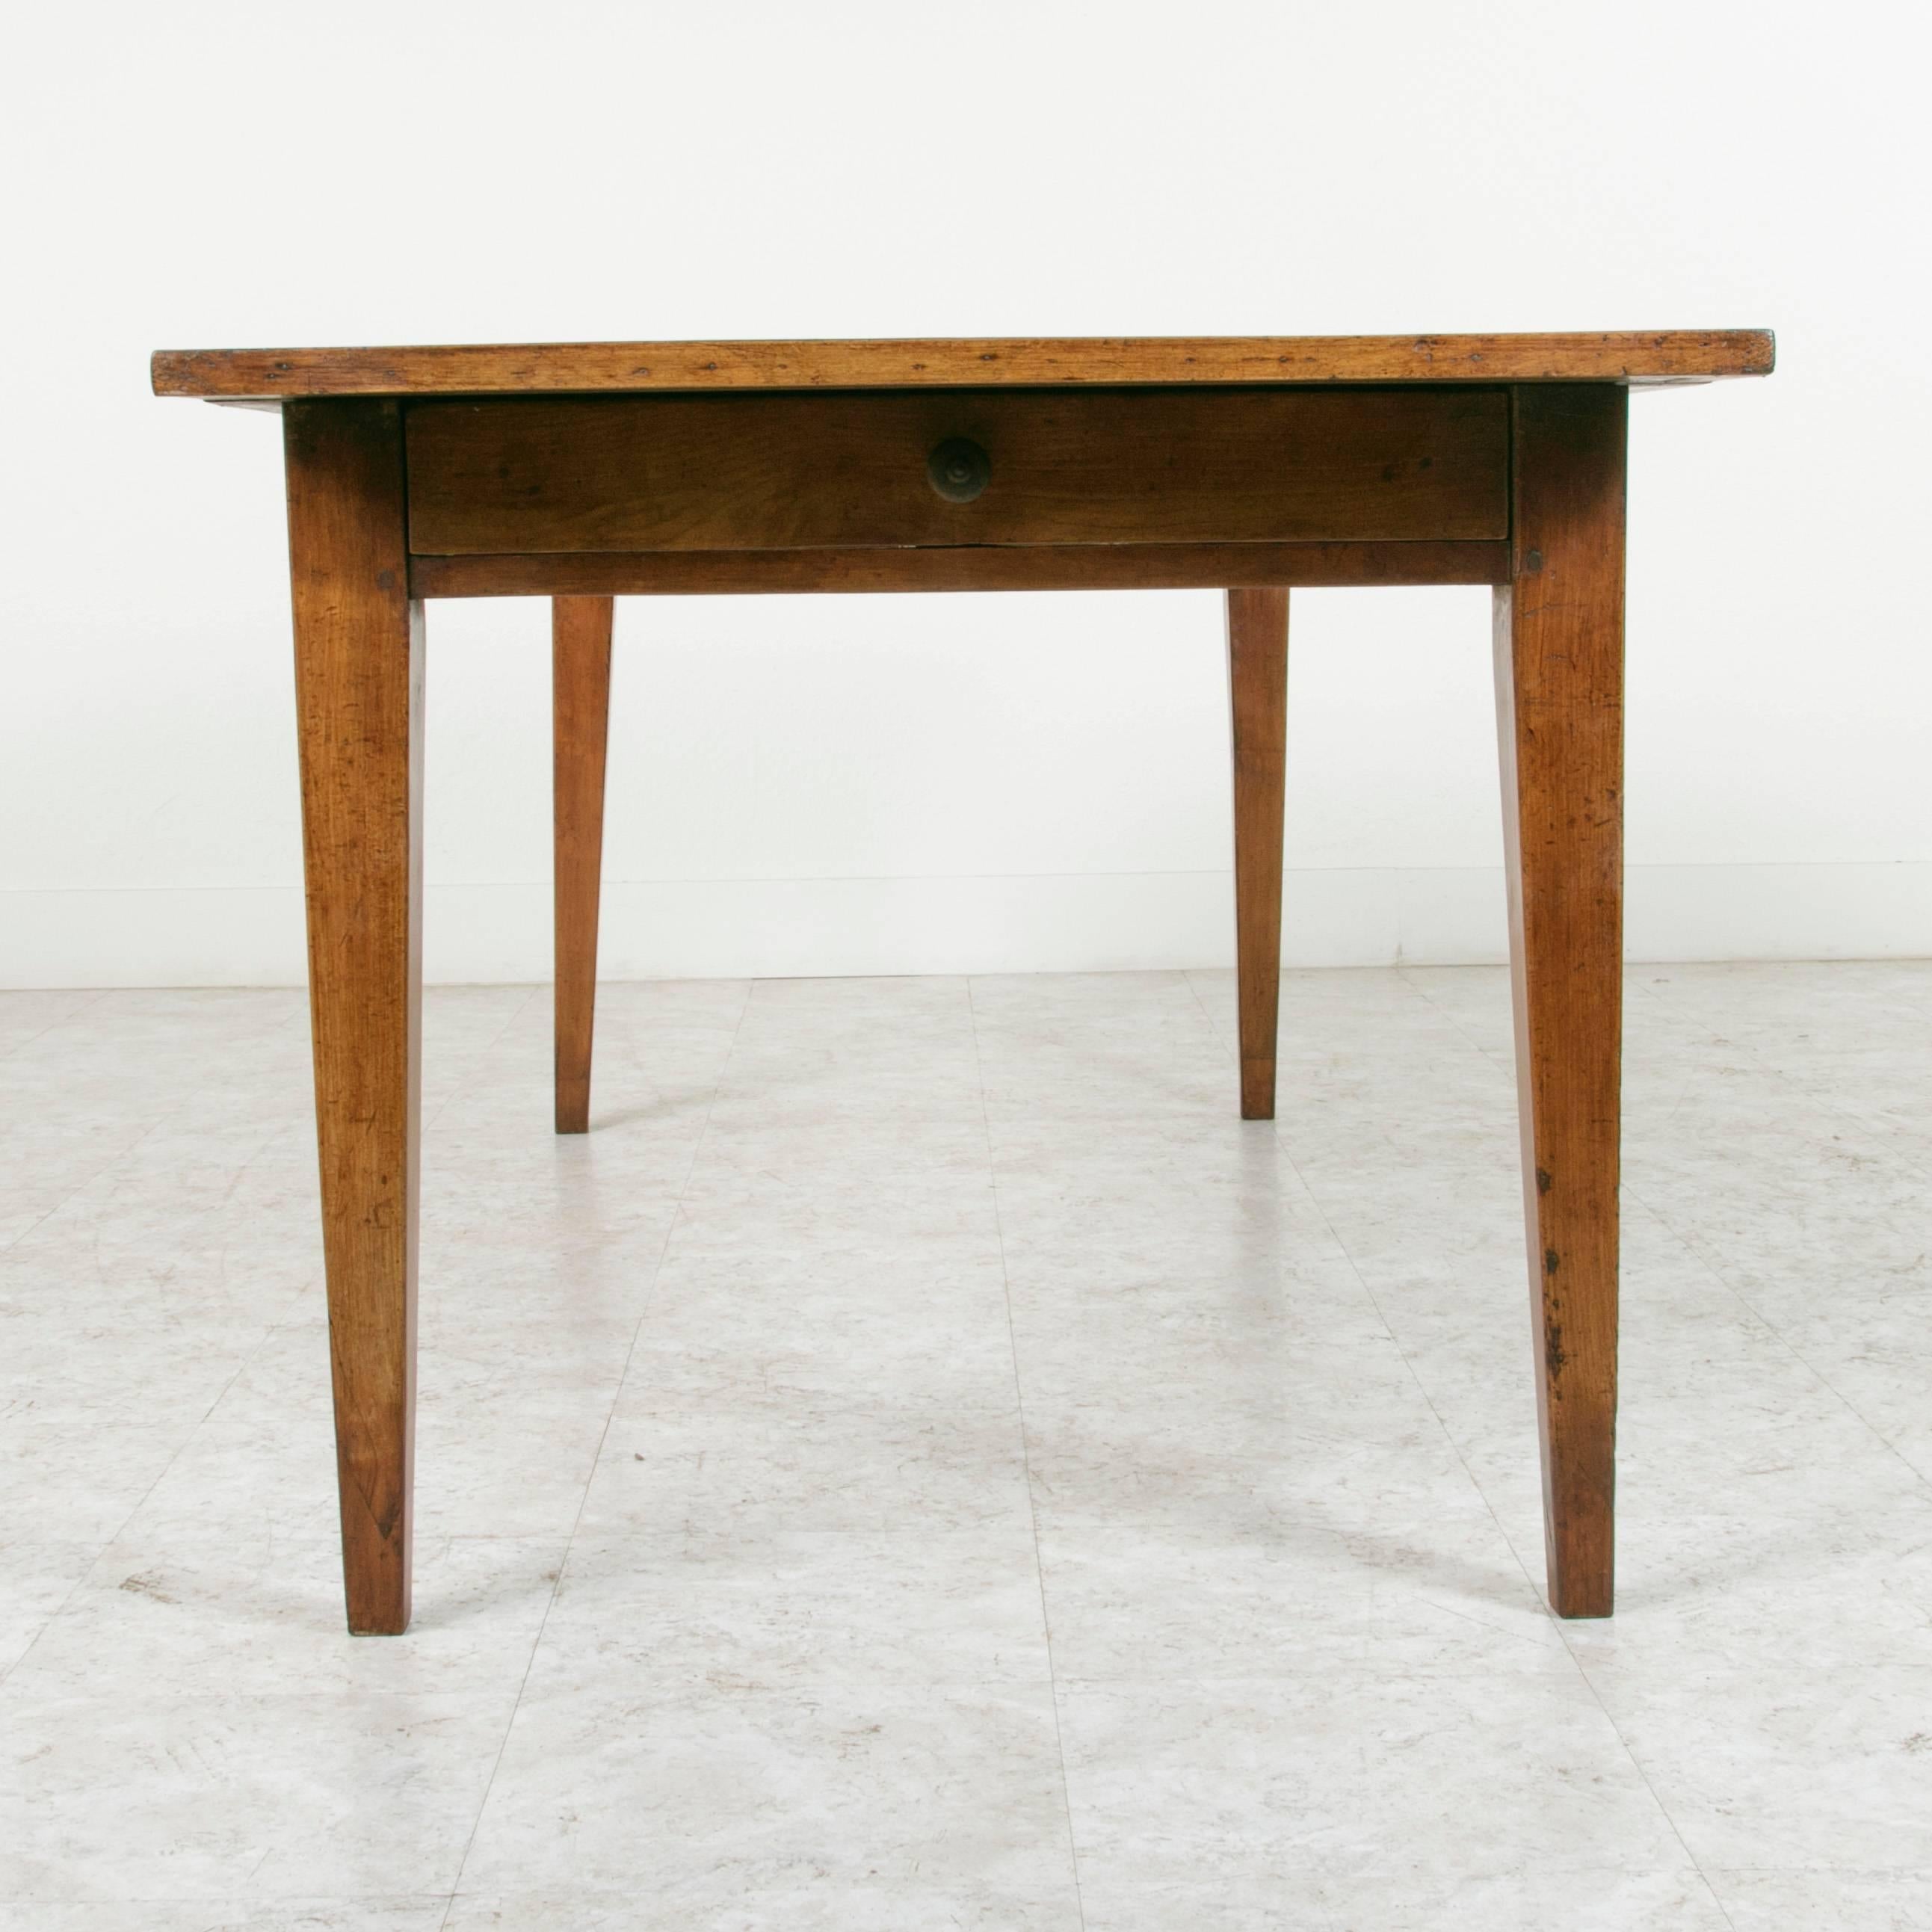 This artisan made farm table has a hand pegged cherry wood base with a walnut and beech top. This piece features a long drawer at each end and simple elegant lines. The age of this table gives it a wonderful warm feeling and at six and a half feet